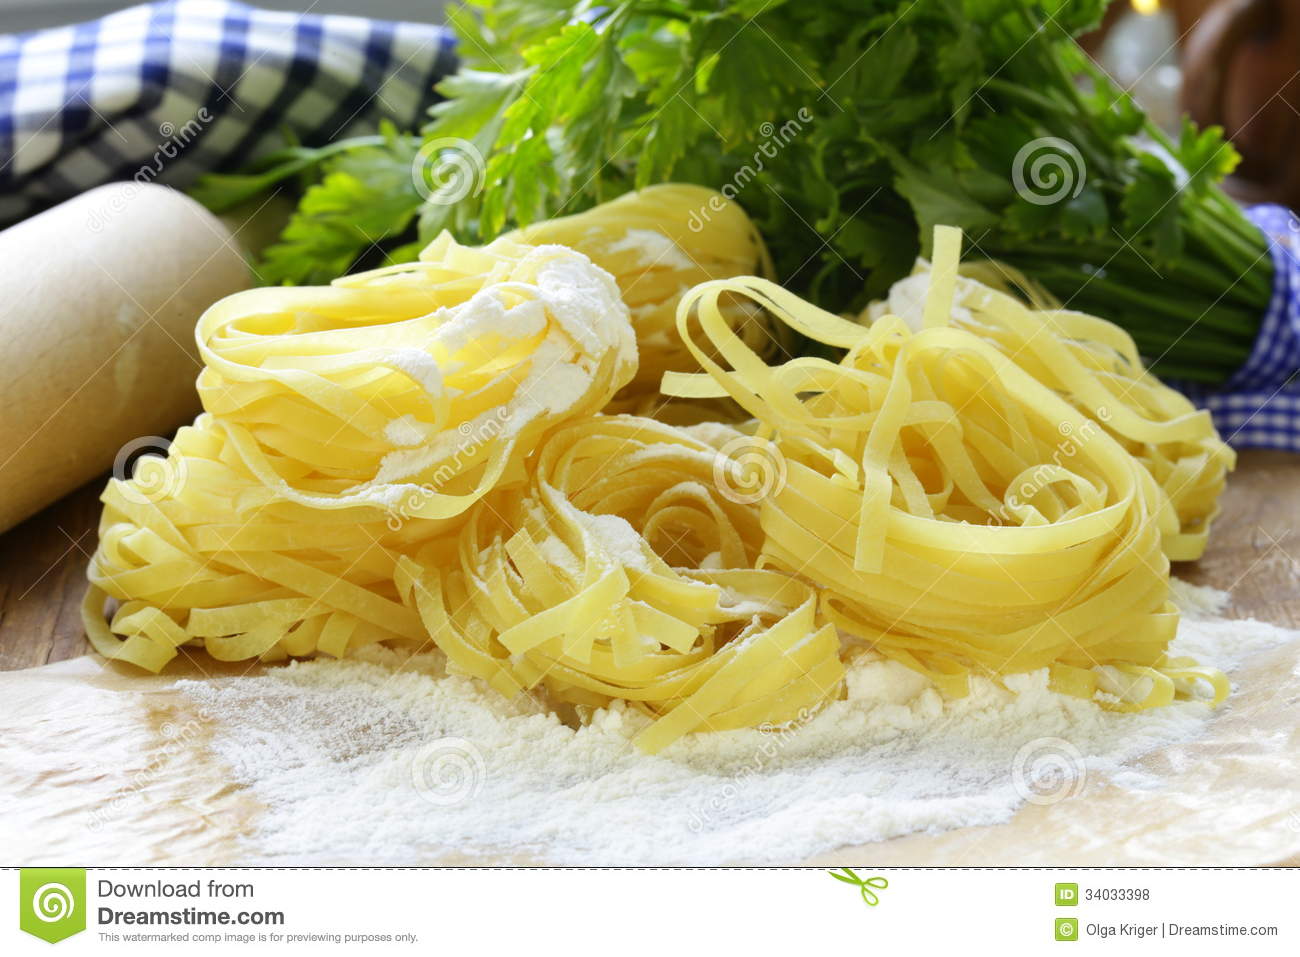 Homemade Noodles  Pasta  Royalty Free Stock Photos   Image  34033398